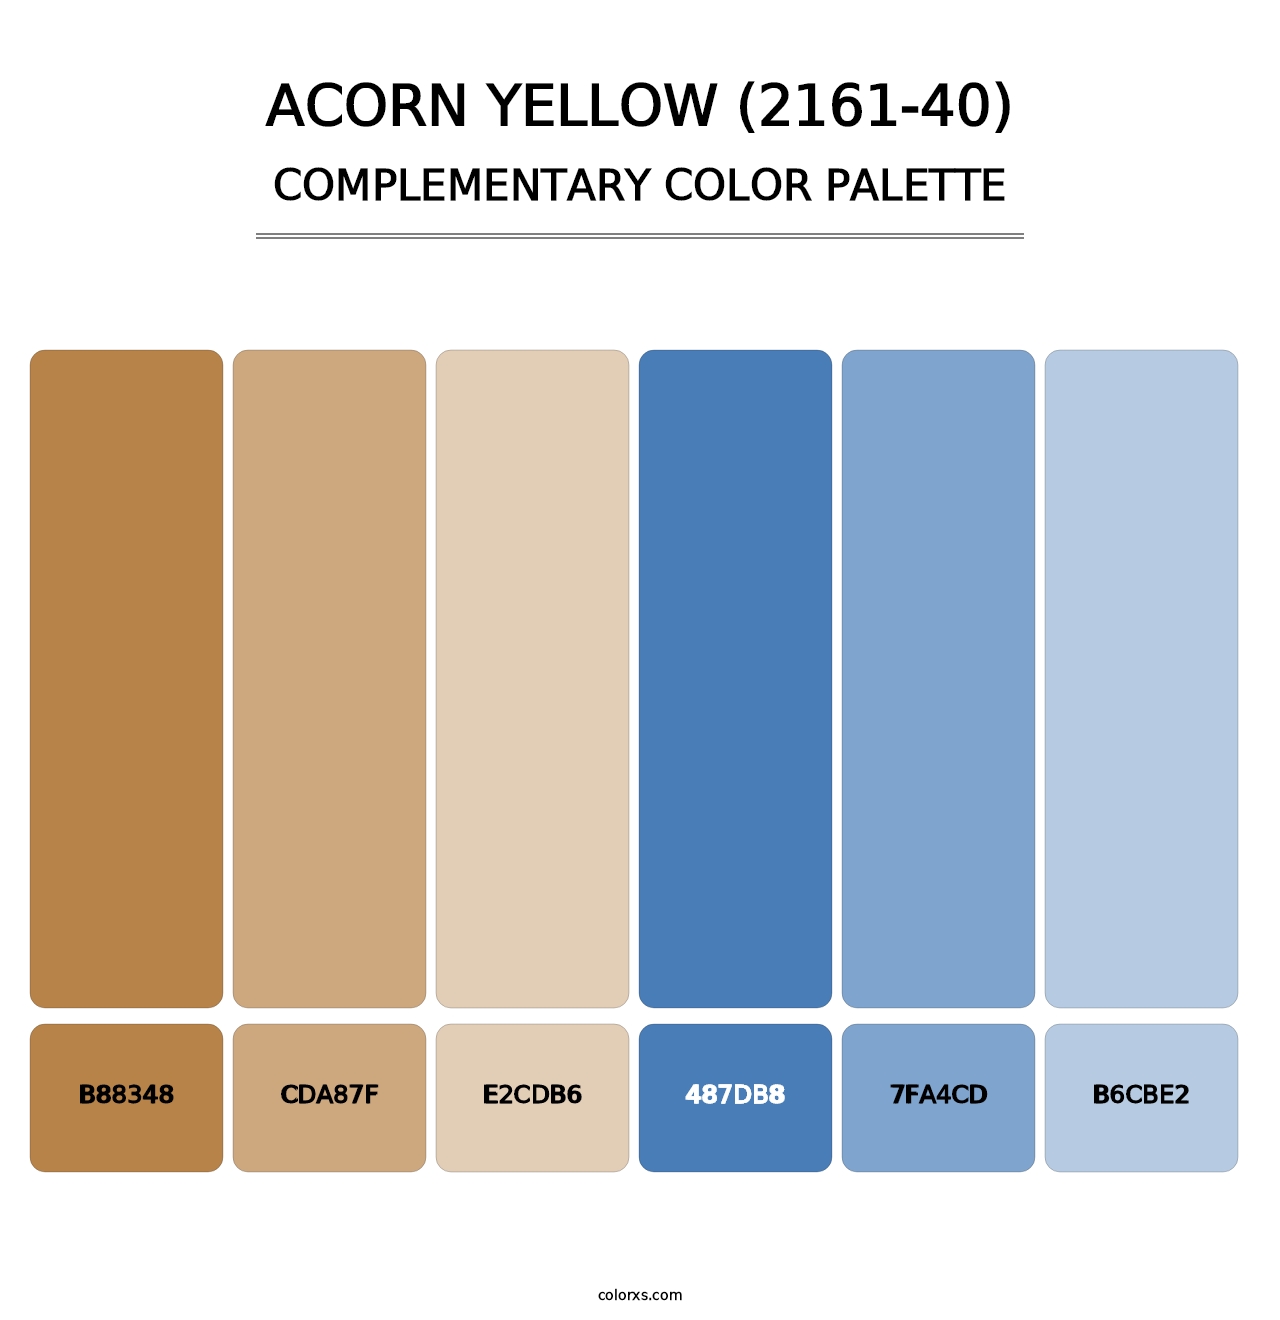 Acorn Yellow (2161-40) - Complementary Color Palette